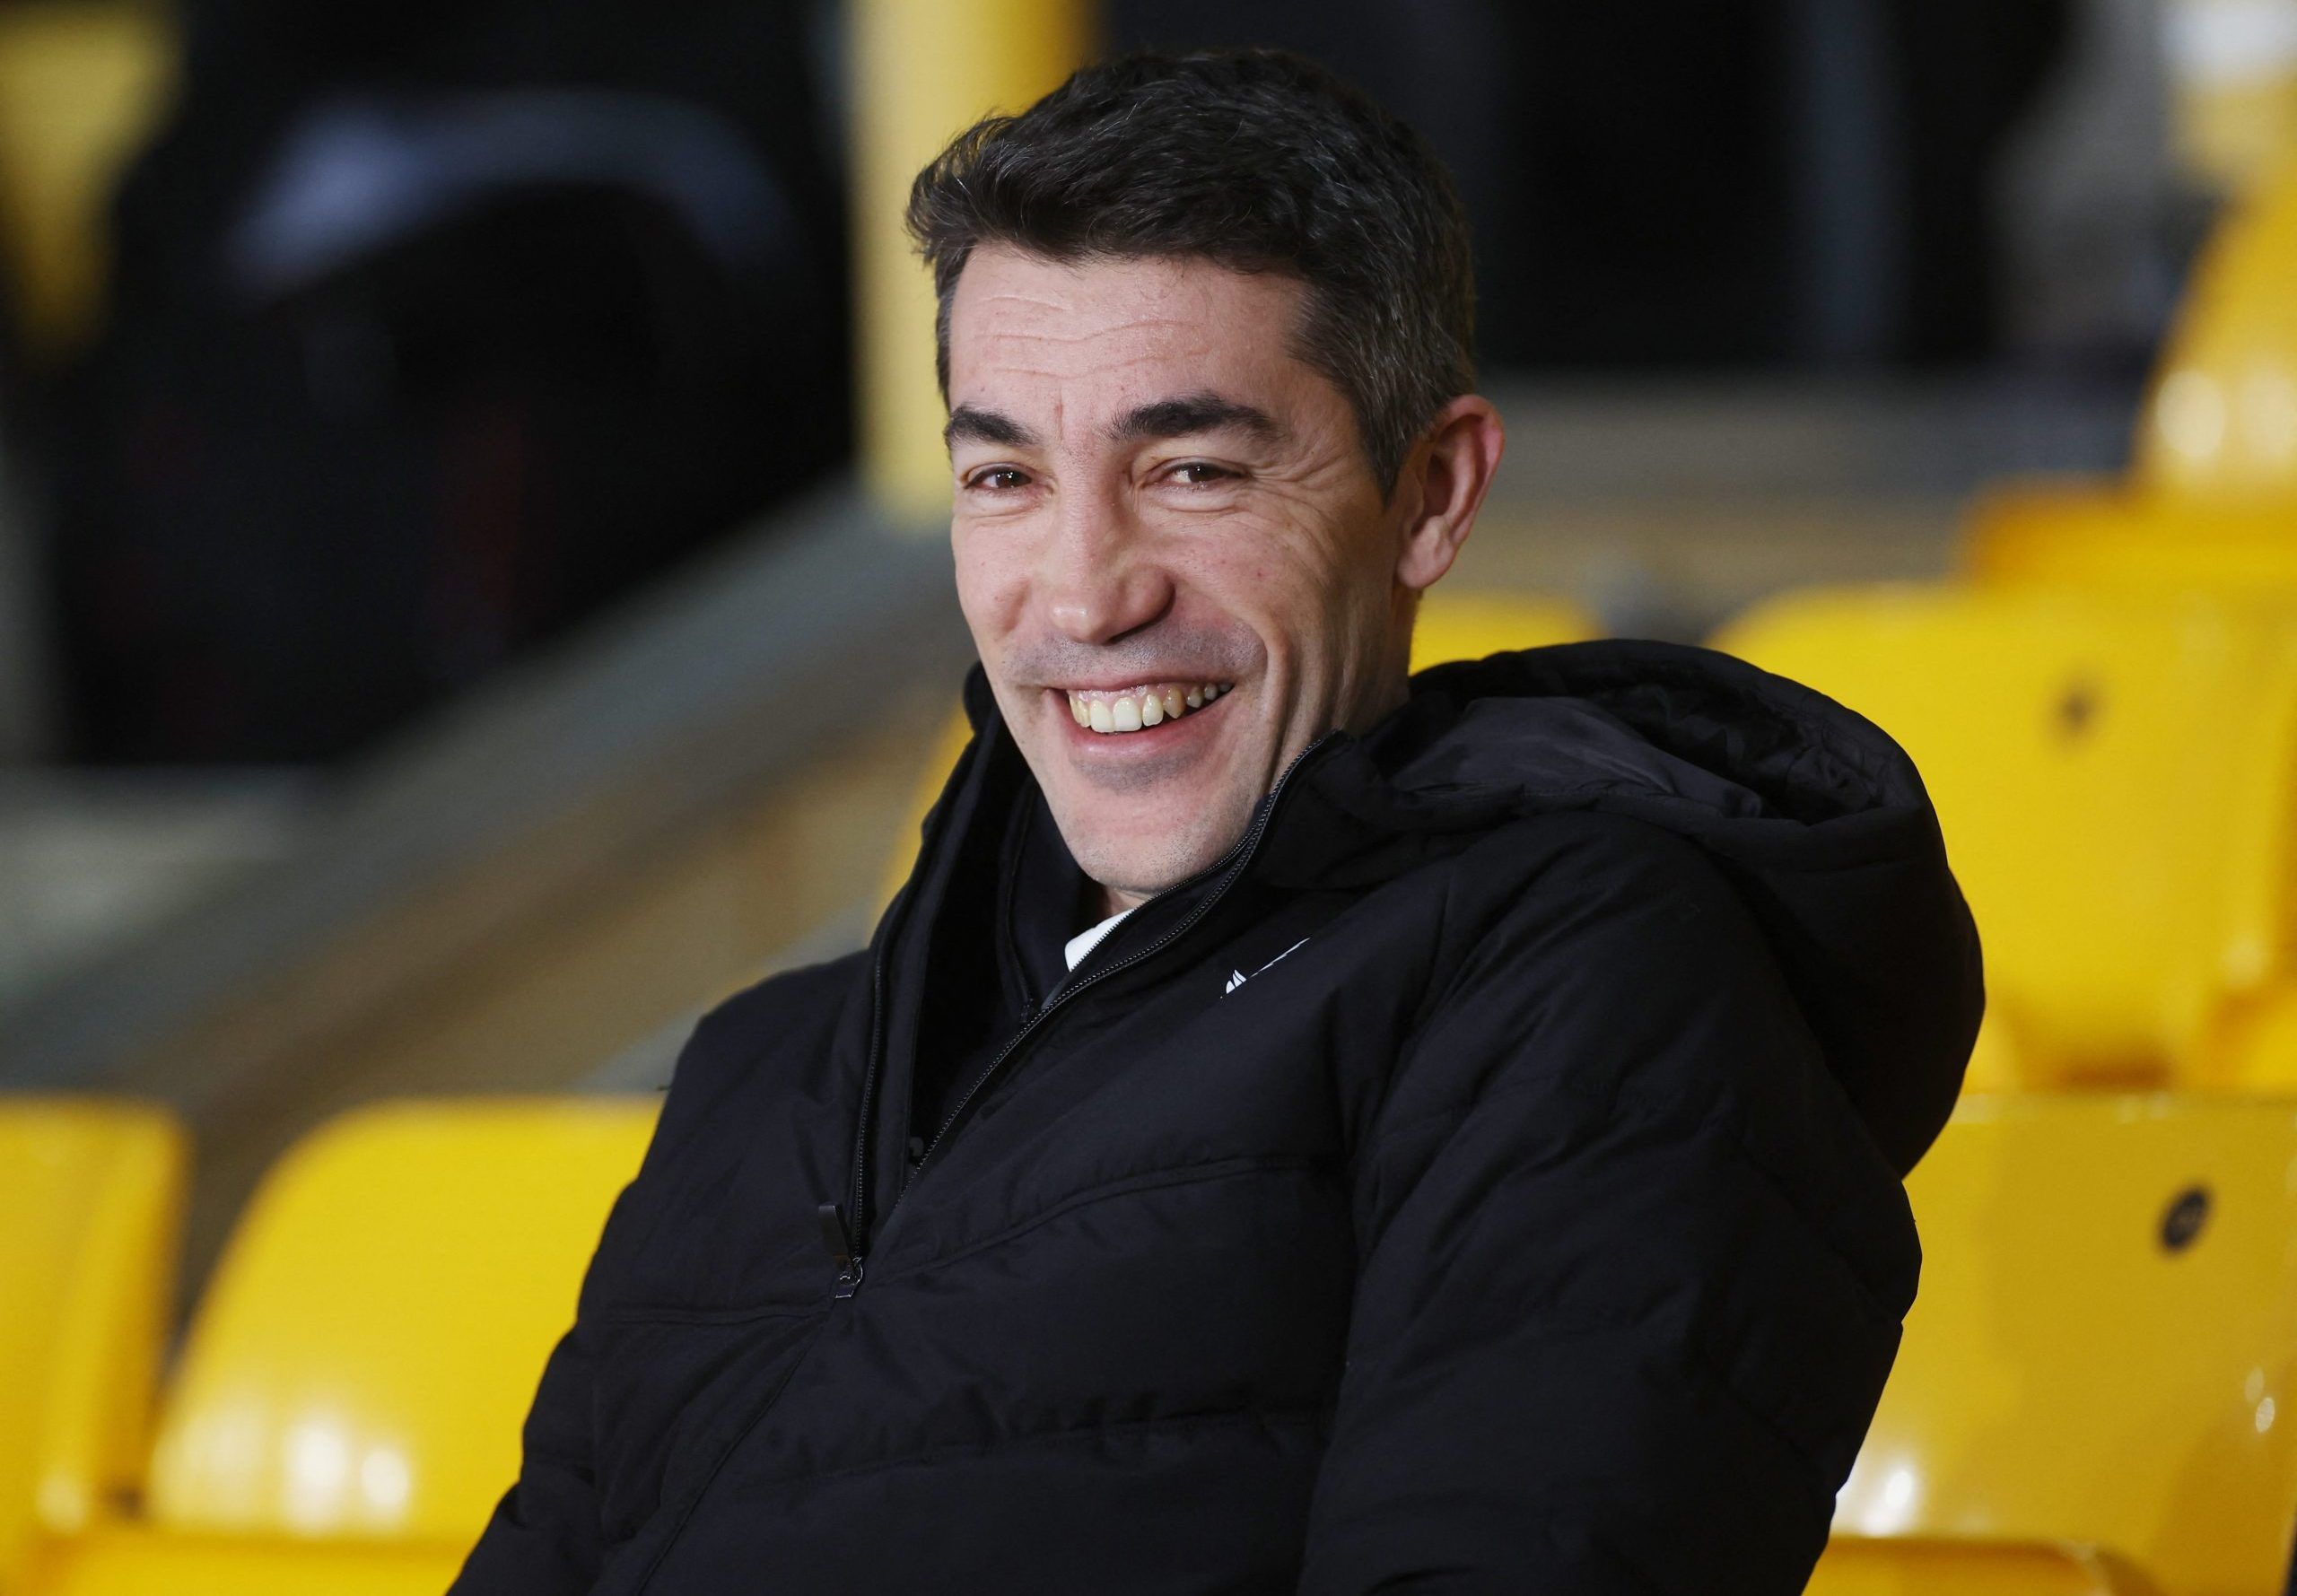 Soccer Football - Premier League - Wolverhampton Wanderers v Leeds United - Molineux Stadium, Wolverhampton, Britain - March 18, 2022 Wolverhampton Wanderers manager Bruno Lage in the stands before the match Action Images via Reuters/Paul Childs EDITORIAL USE ONLY. No use with unauthorized audio, video, data, fixture lists, club/league logos or 'live' services. Online in-match use limited to 75 images, no video emulation. No use in betting, games or single club /league/player publications.  Plea